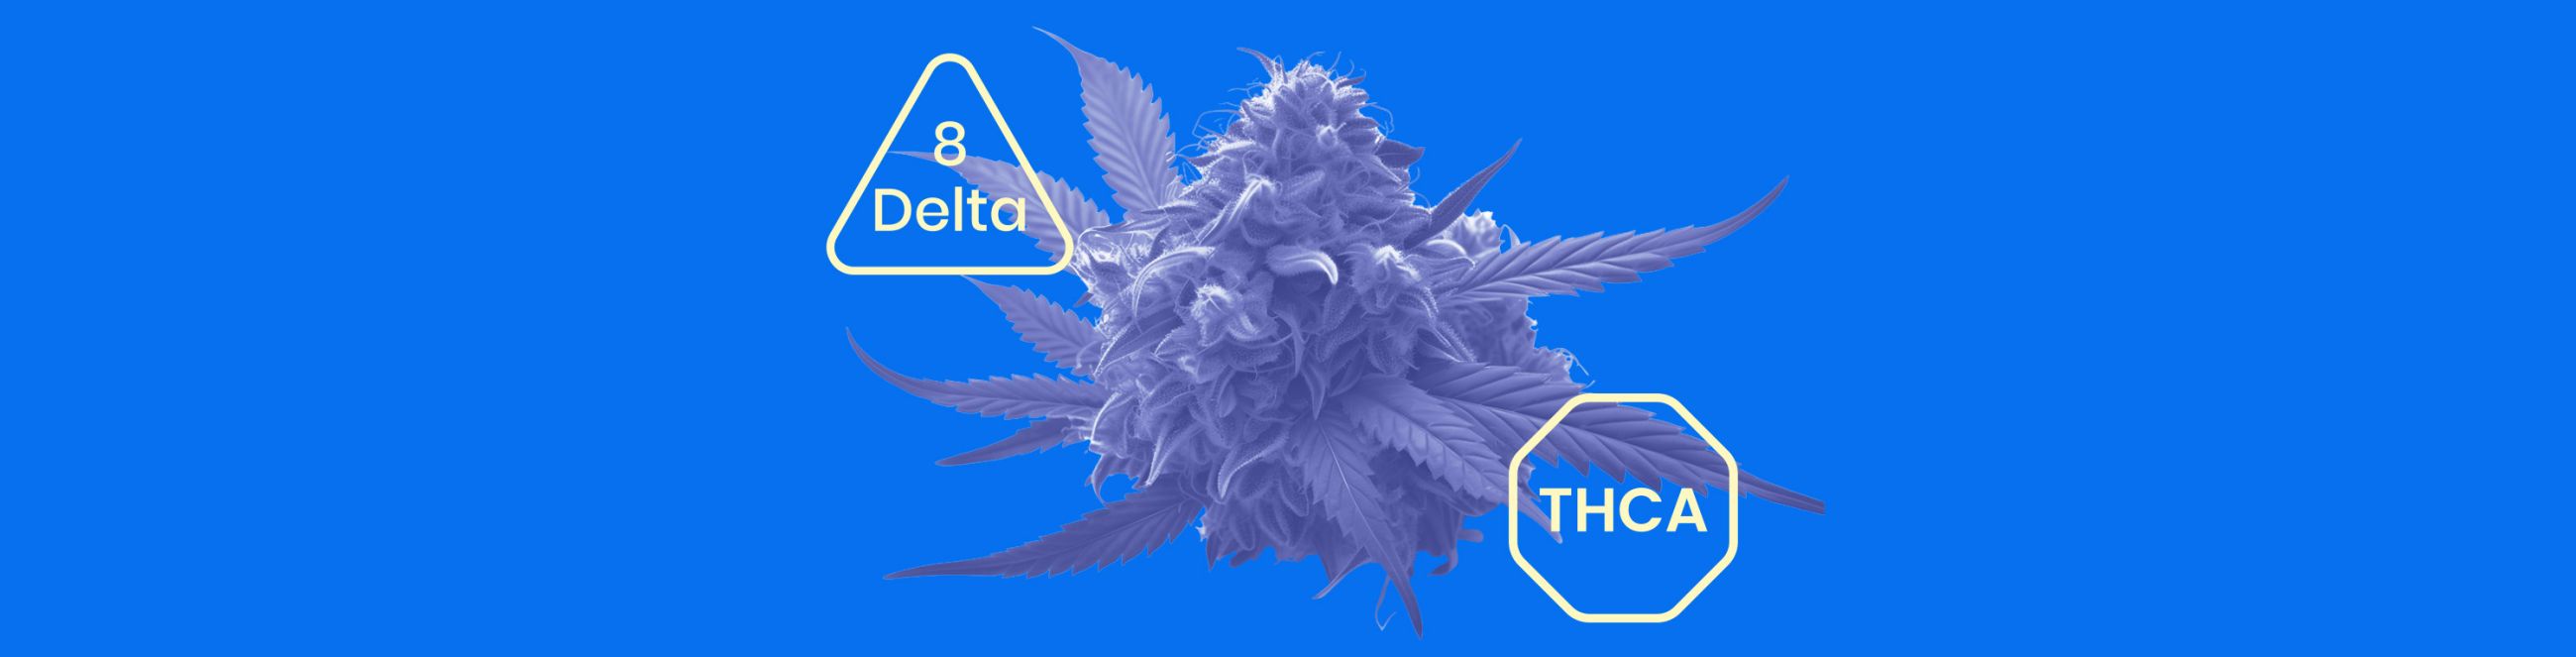 THCA vs Delta 8 Explained: Effects, Legality & More